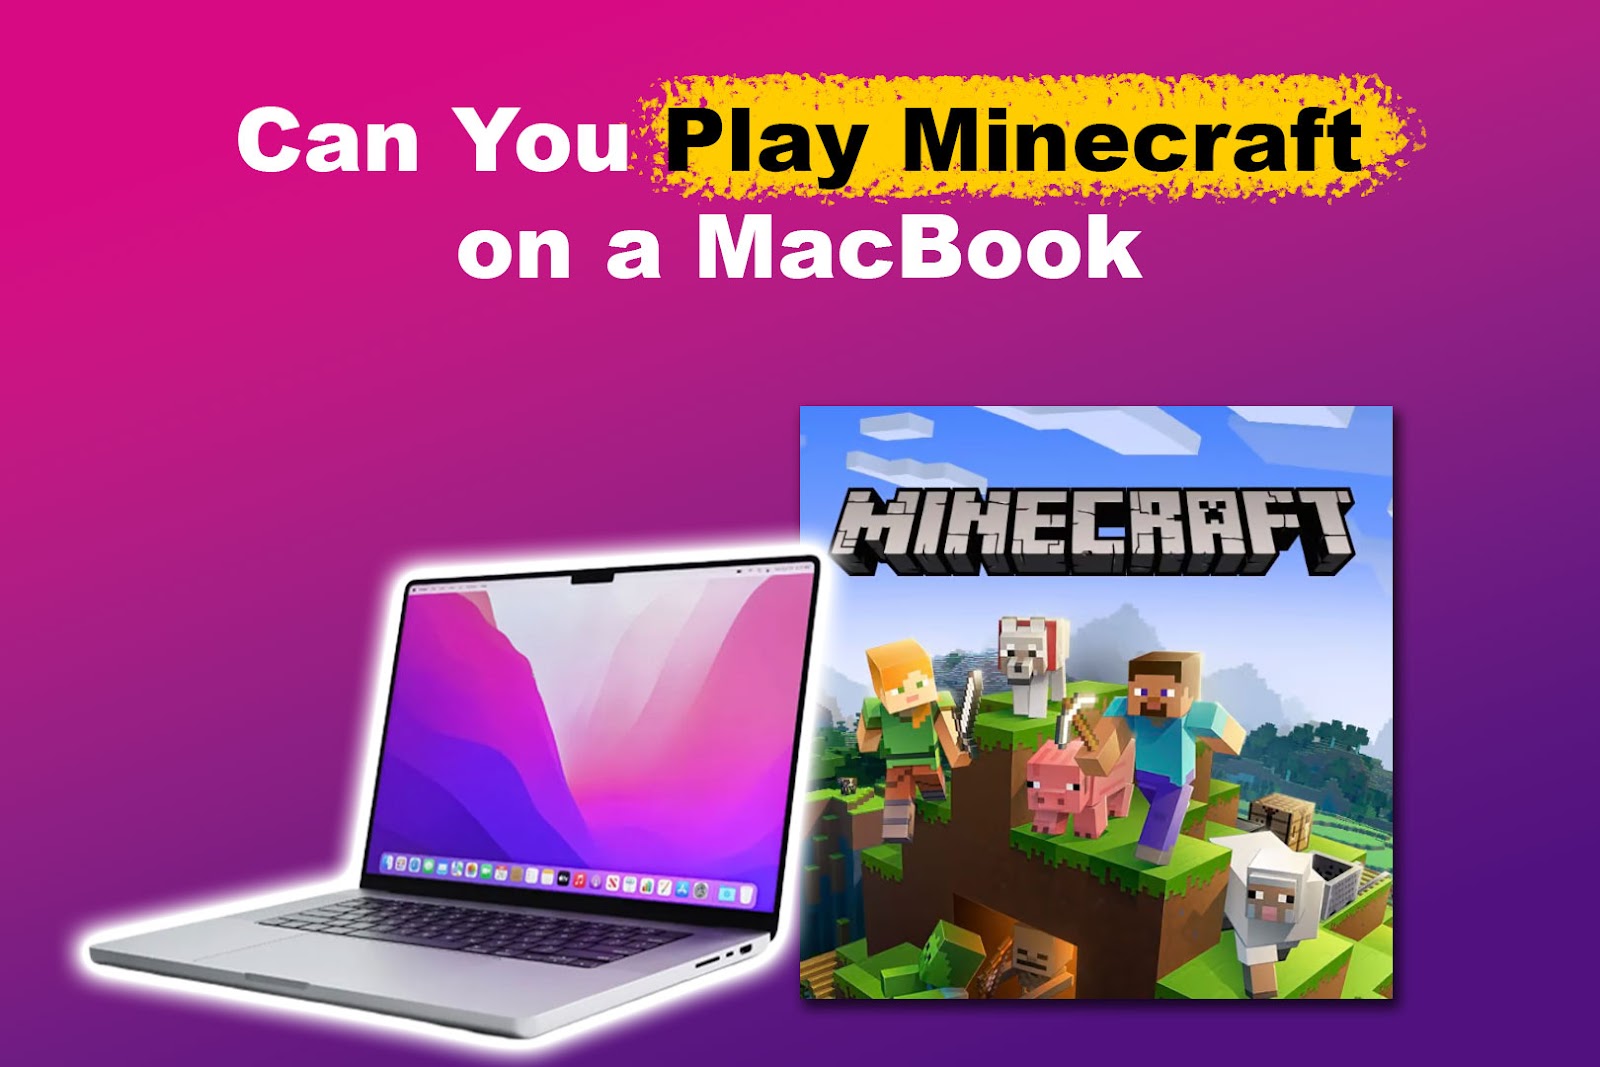 Can You Play Minecraft on a MacBook